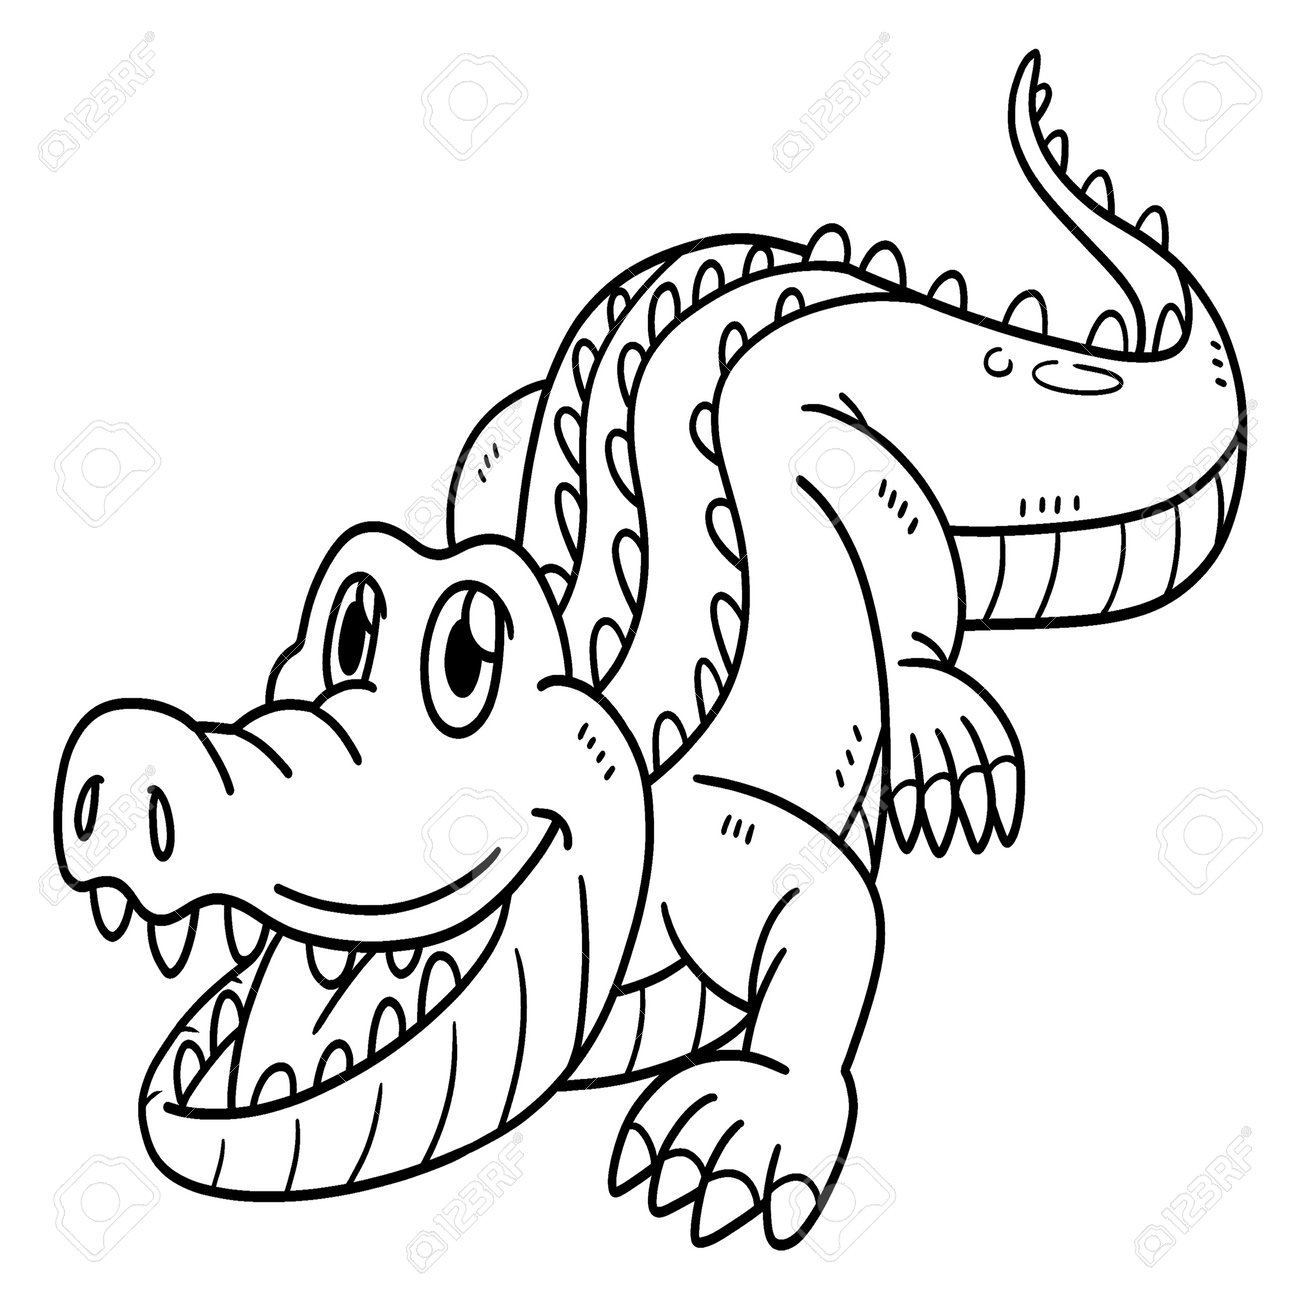 Crocodile animal isolated coloring page for kids royalty free svg cliparts vectors and stock illustration image